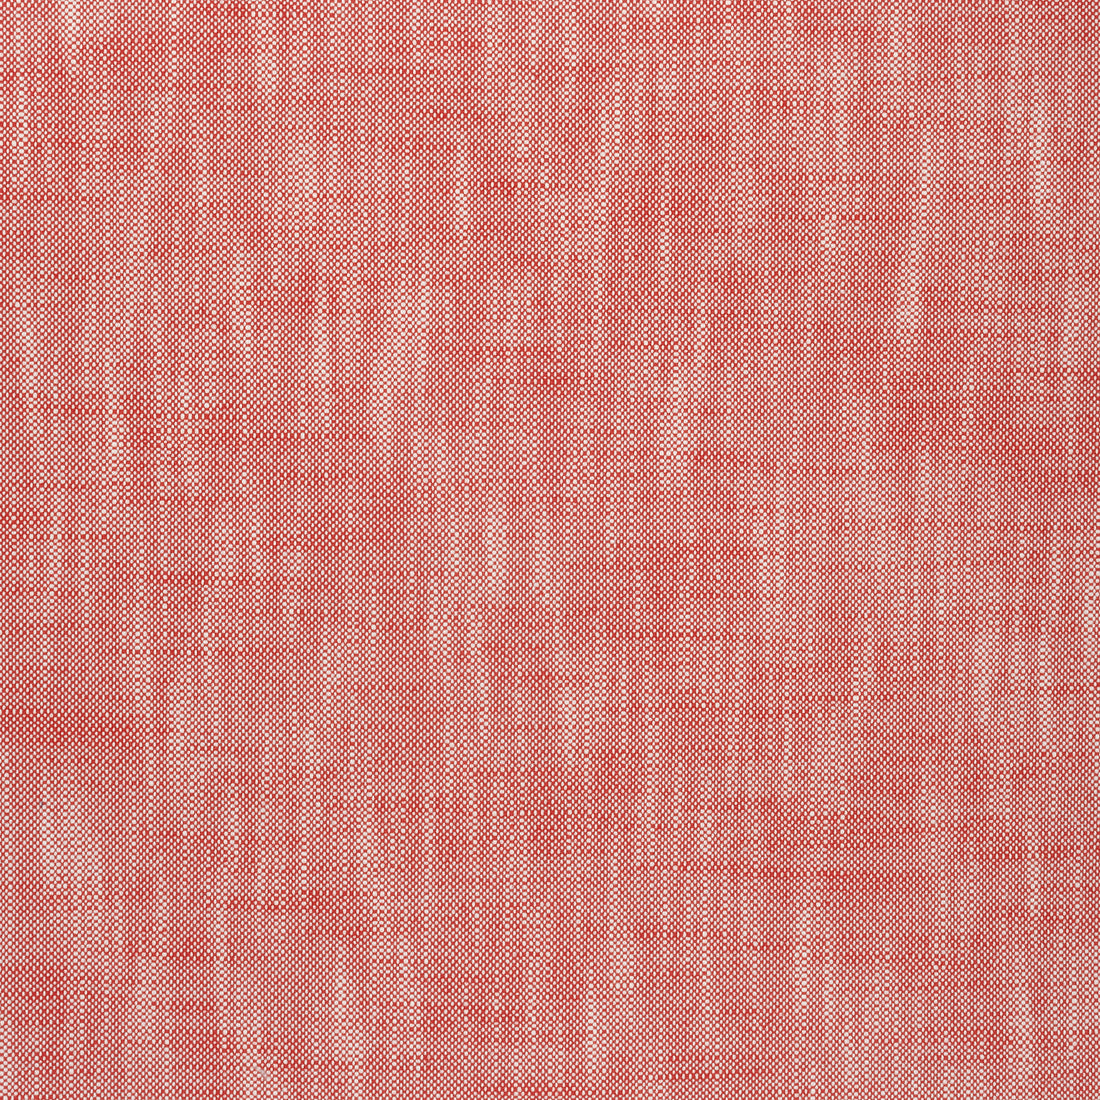 Bristol fabric in cranberry color - pattern number W73407 - by Thibaut in the Landmark Textures collection